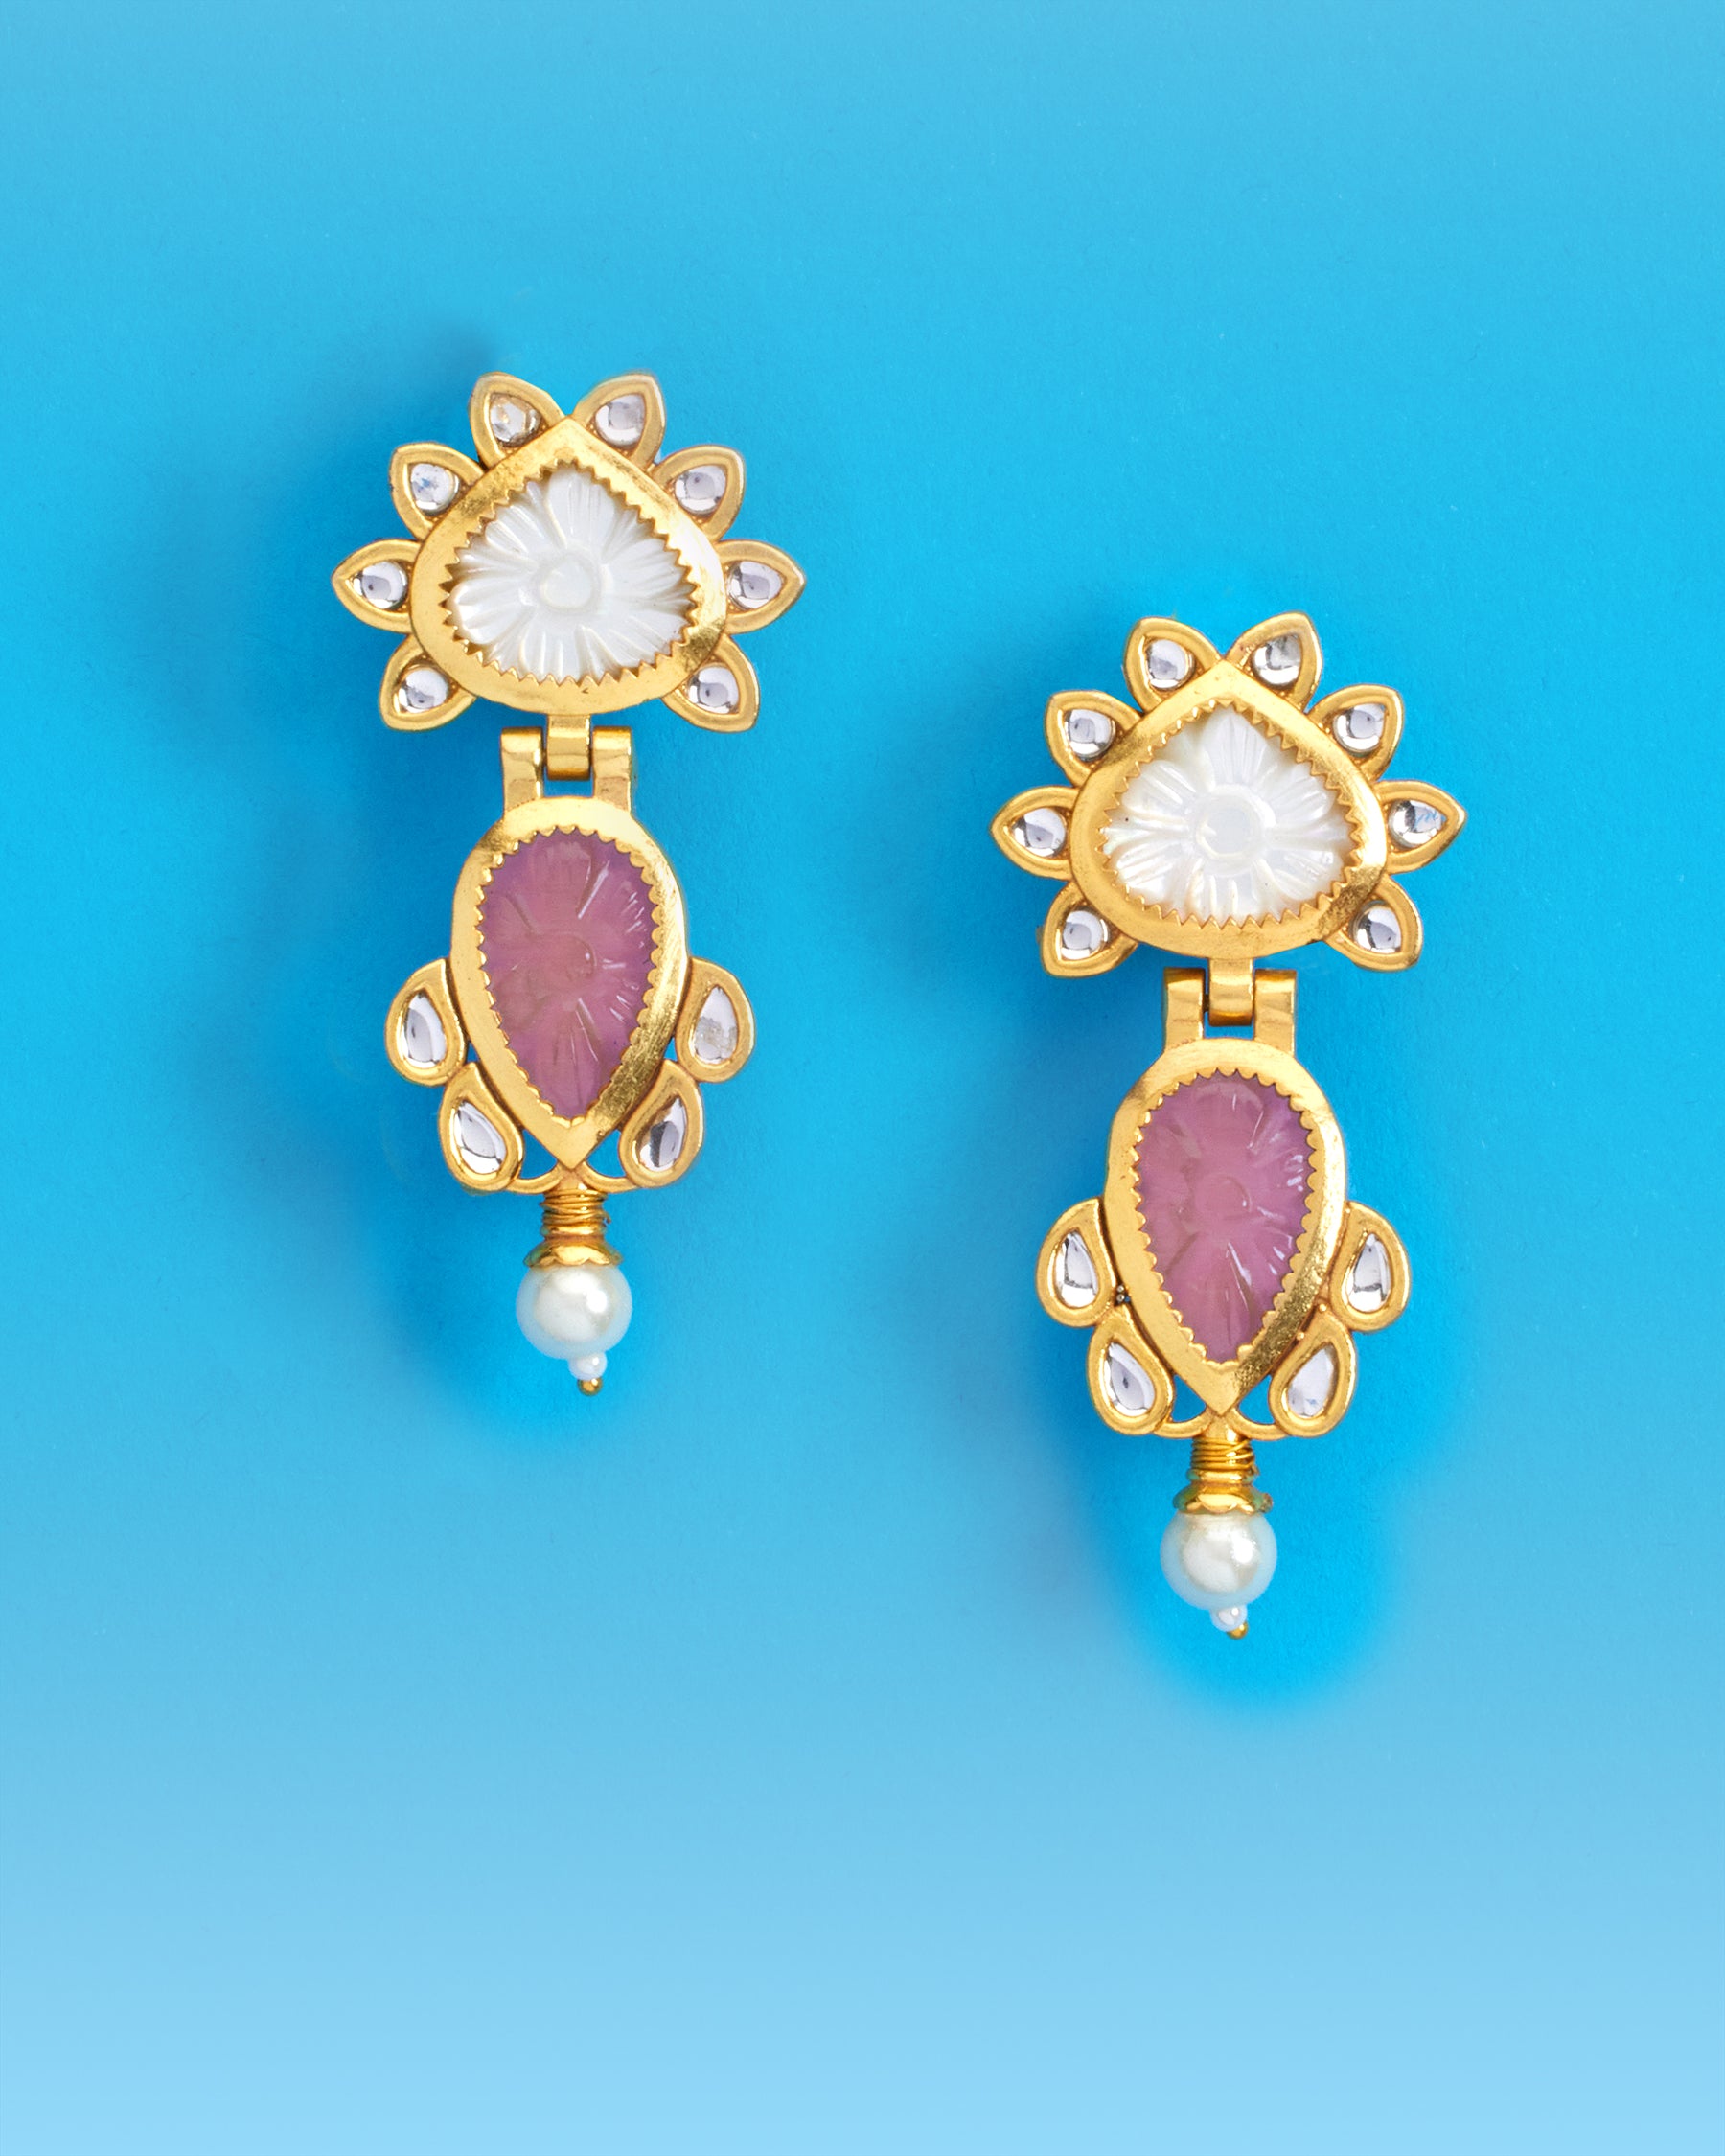 Parker Earrings in White and Pink (Clip-On)